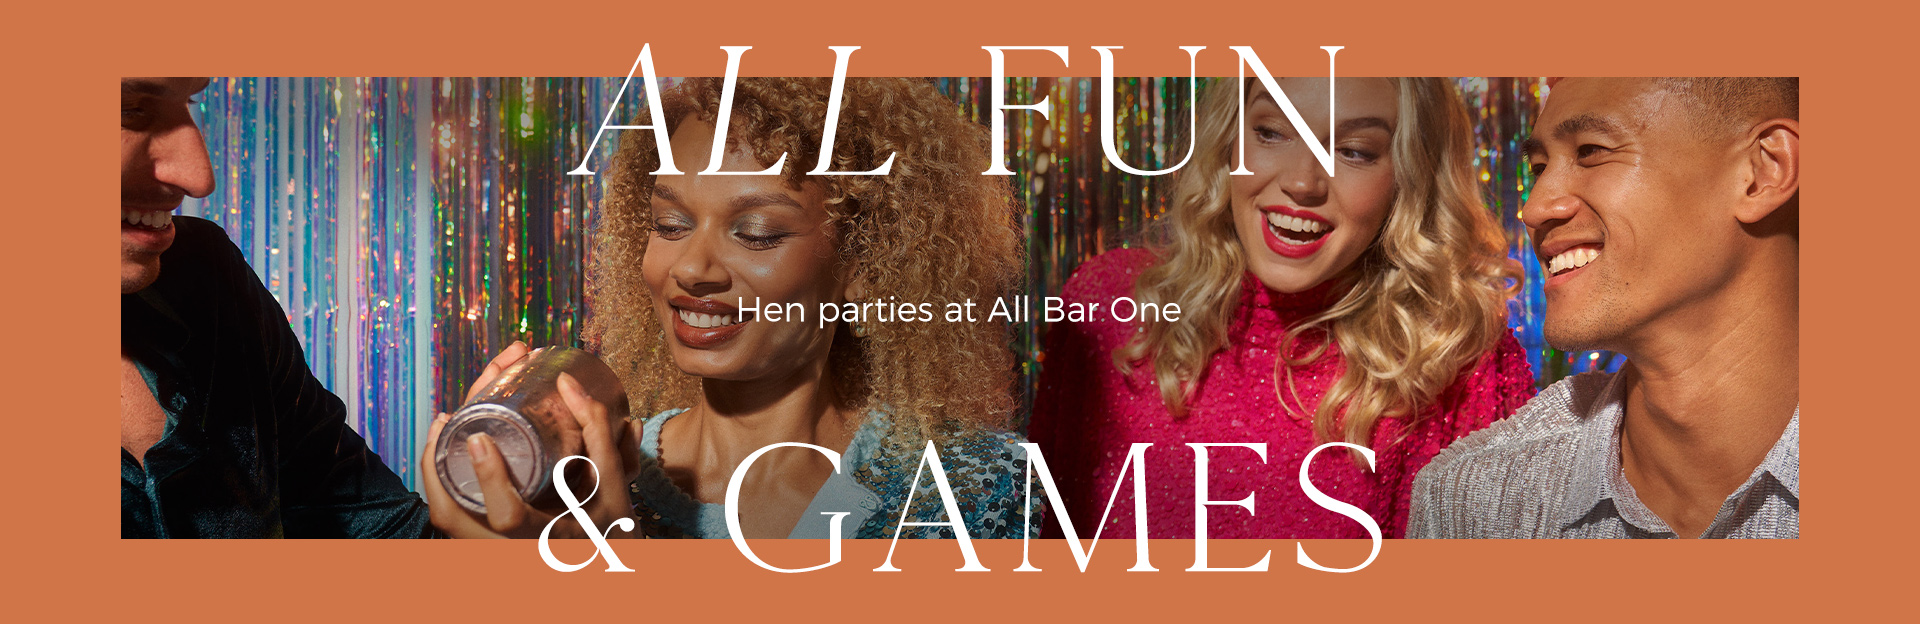 Hen parties at All Bar One Glasgow